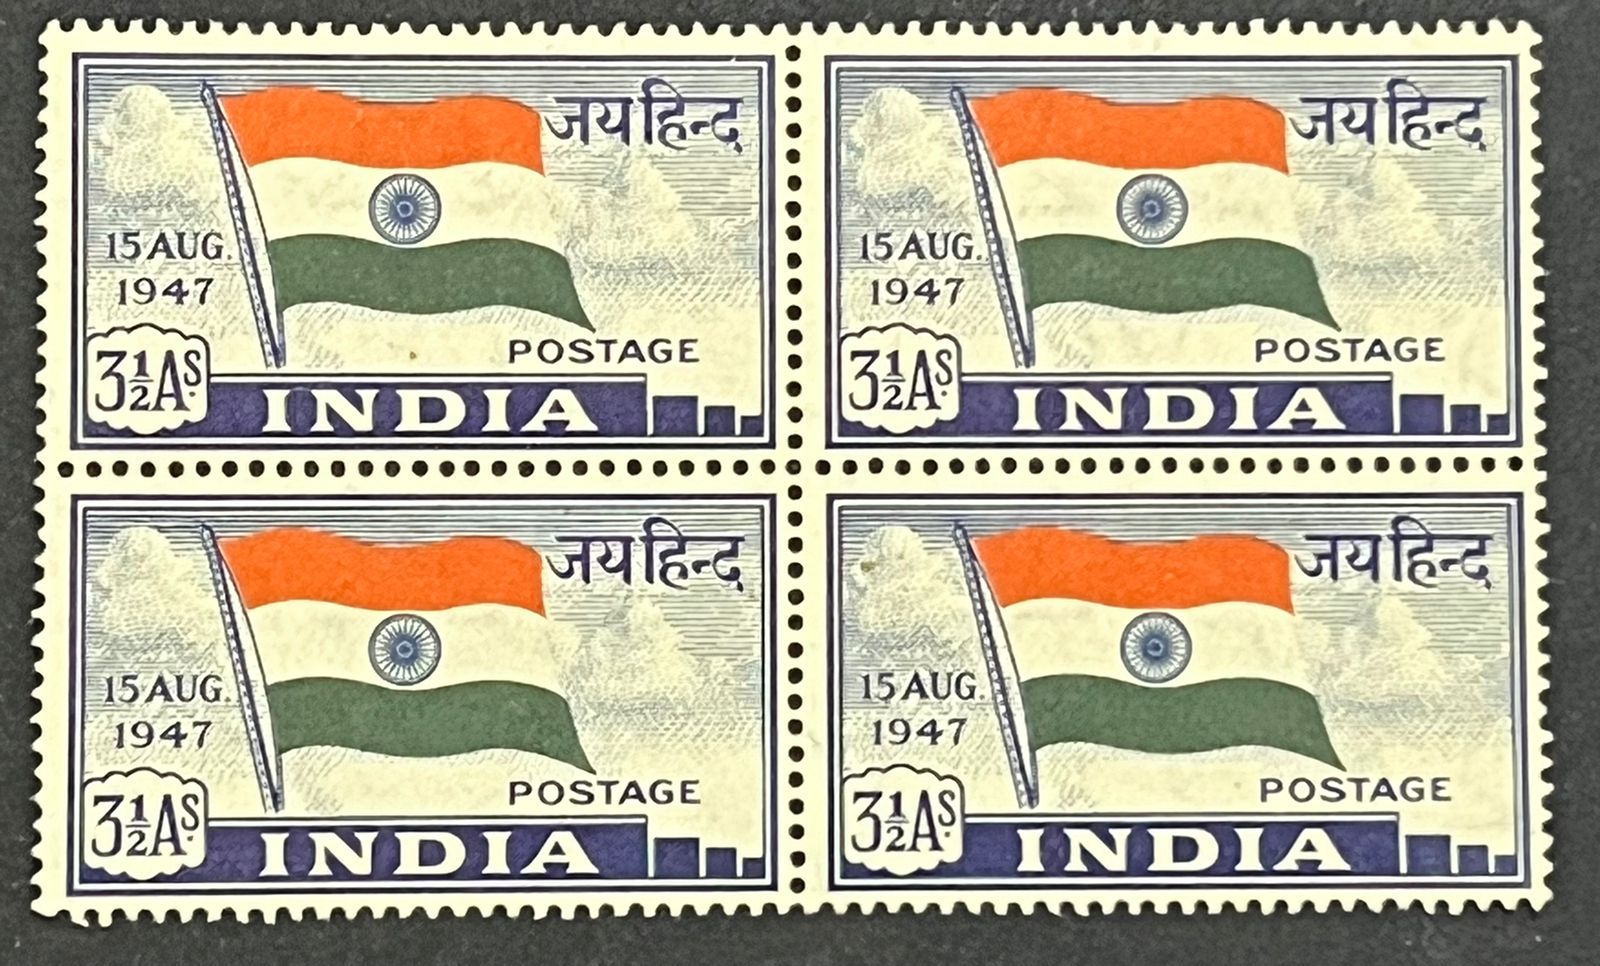 India 1947 First Stamp of India Flag, WATERMARK INVERTED Block of 4 MNH White Gum